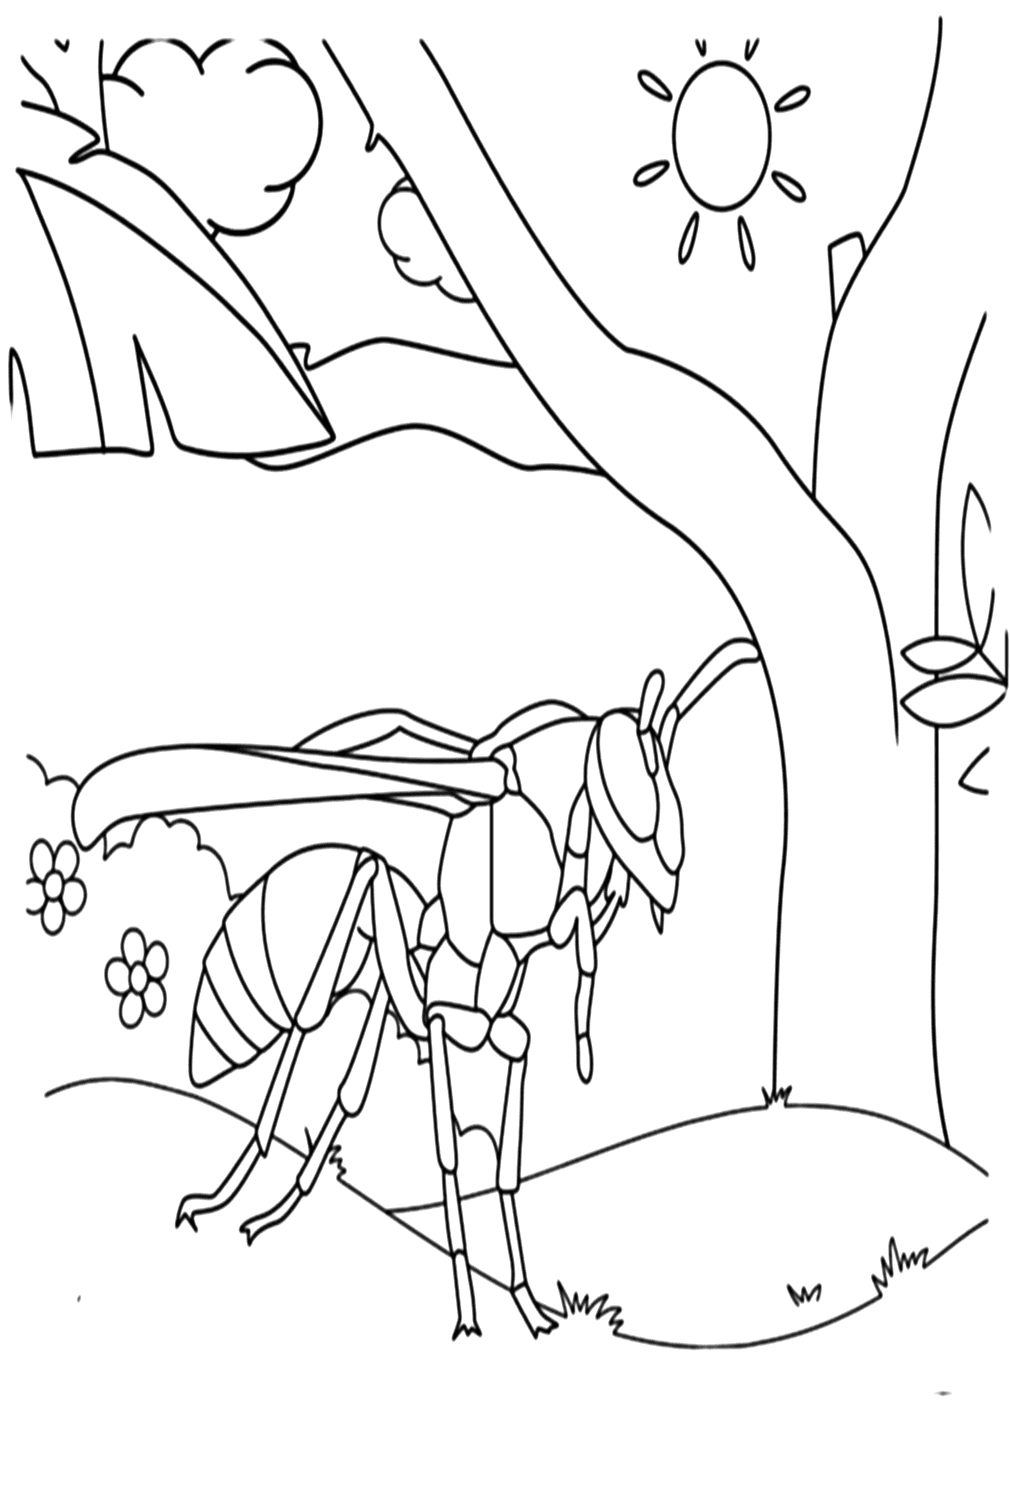 Free Wasp Coloring Page from Wasp